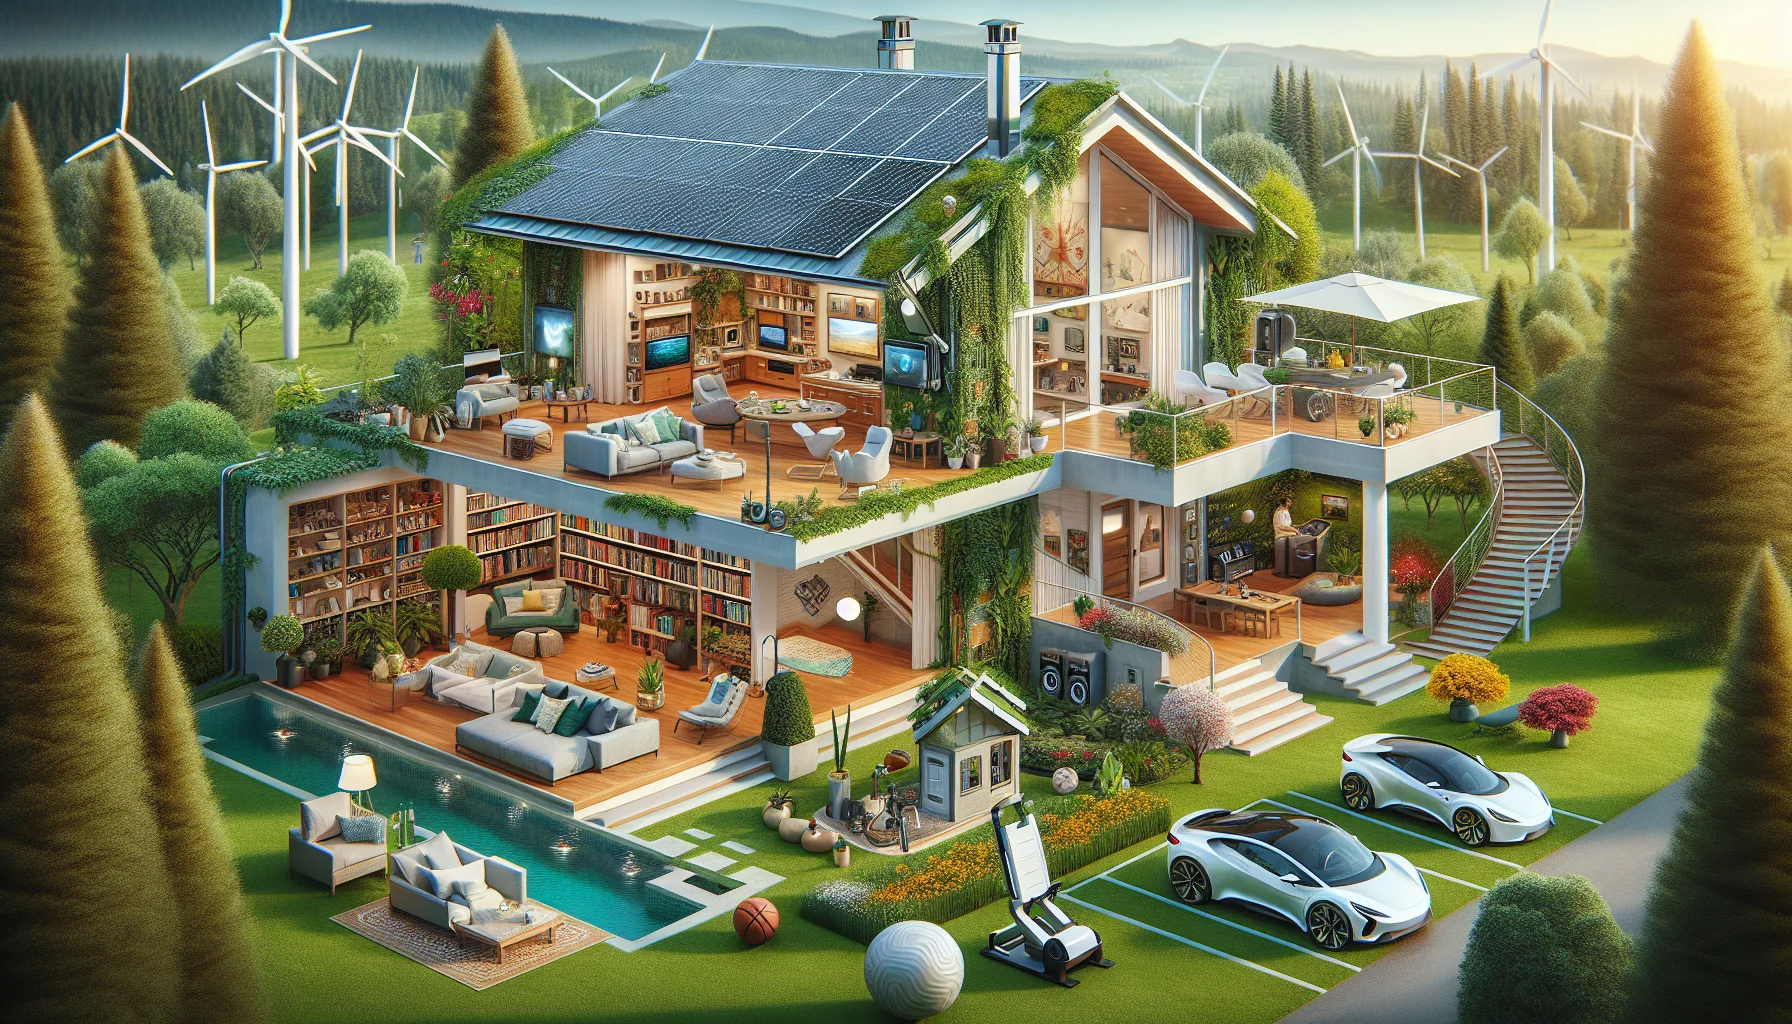 Generate a humorous, realistic image in a utopian real estate scenario. Envision a house featuring all the must-have amenities: a lush green garden with verdant plants and spring flowers, a modern kitchen equipped with state-of-the-art appliances, a spacious, well-lit living room with comfortable and elegant furniture, a personal library filled with different genre books, a gym with latest workout equipment, a restful bedroom with a king-size bed and a breathtaking view. Also, include a garage with high-end, eco-friendly electric vehicles, and finally, a solar panel setup on the roof for sustainable electricity production.